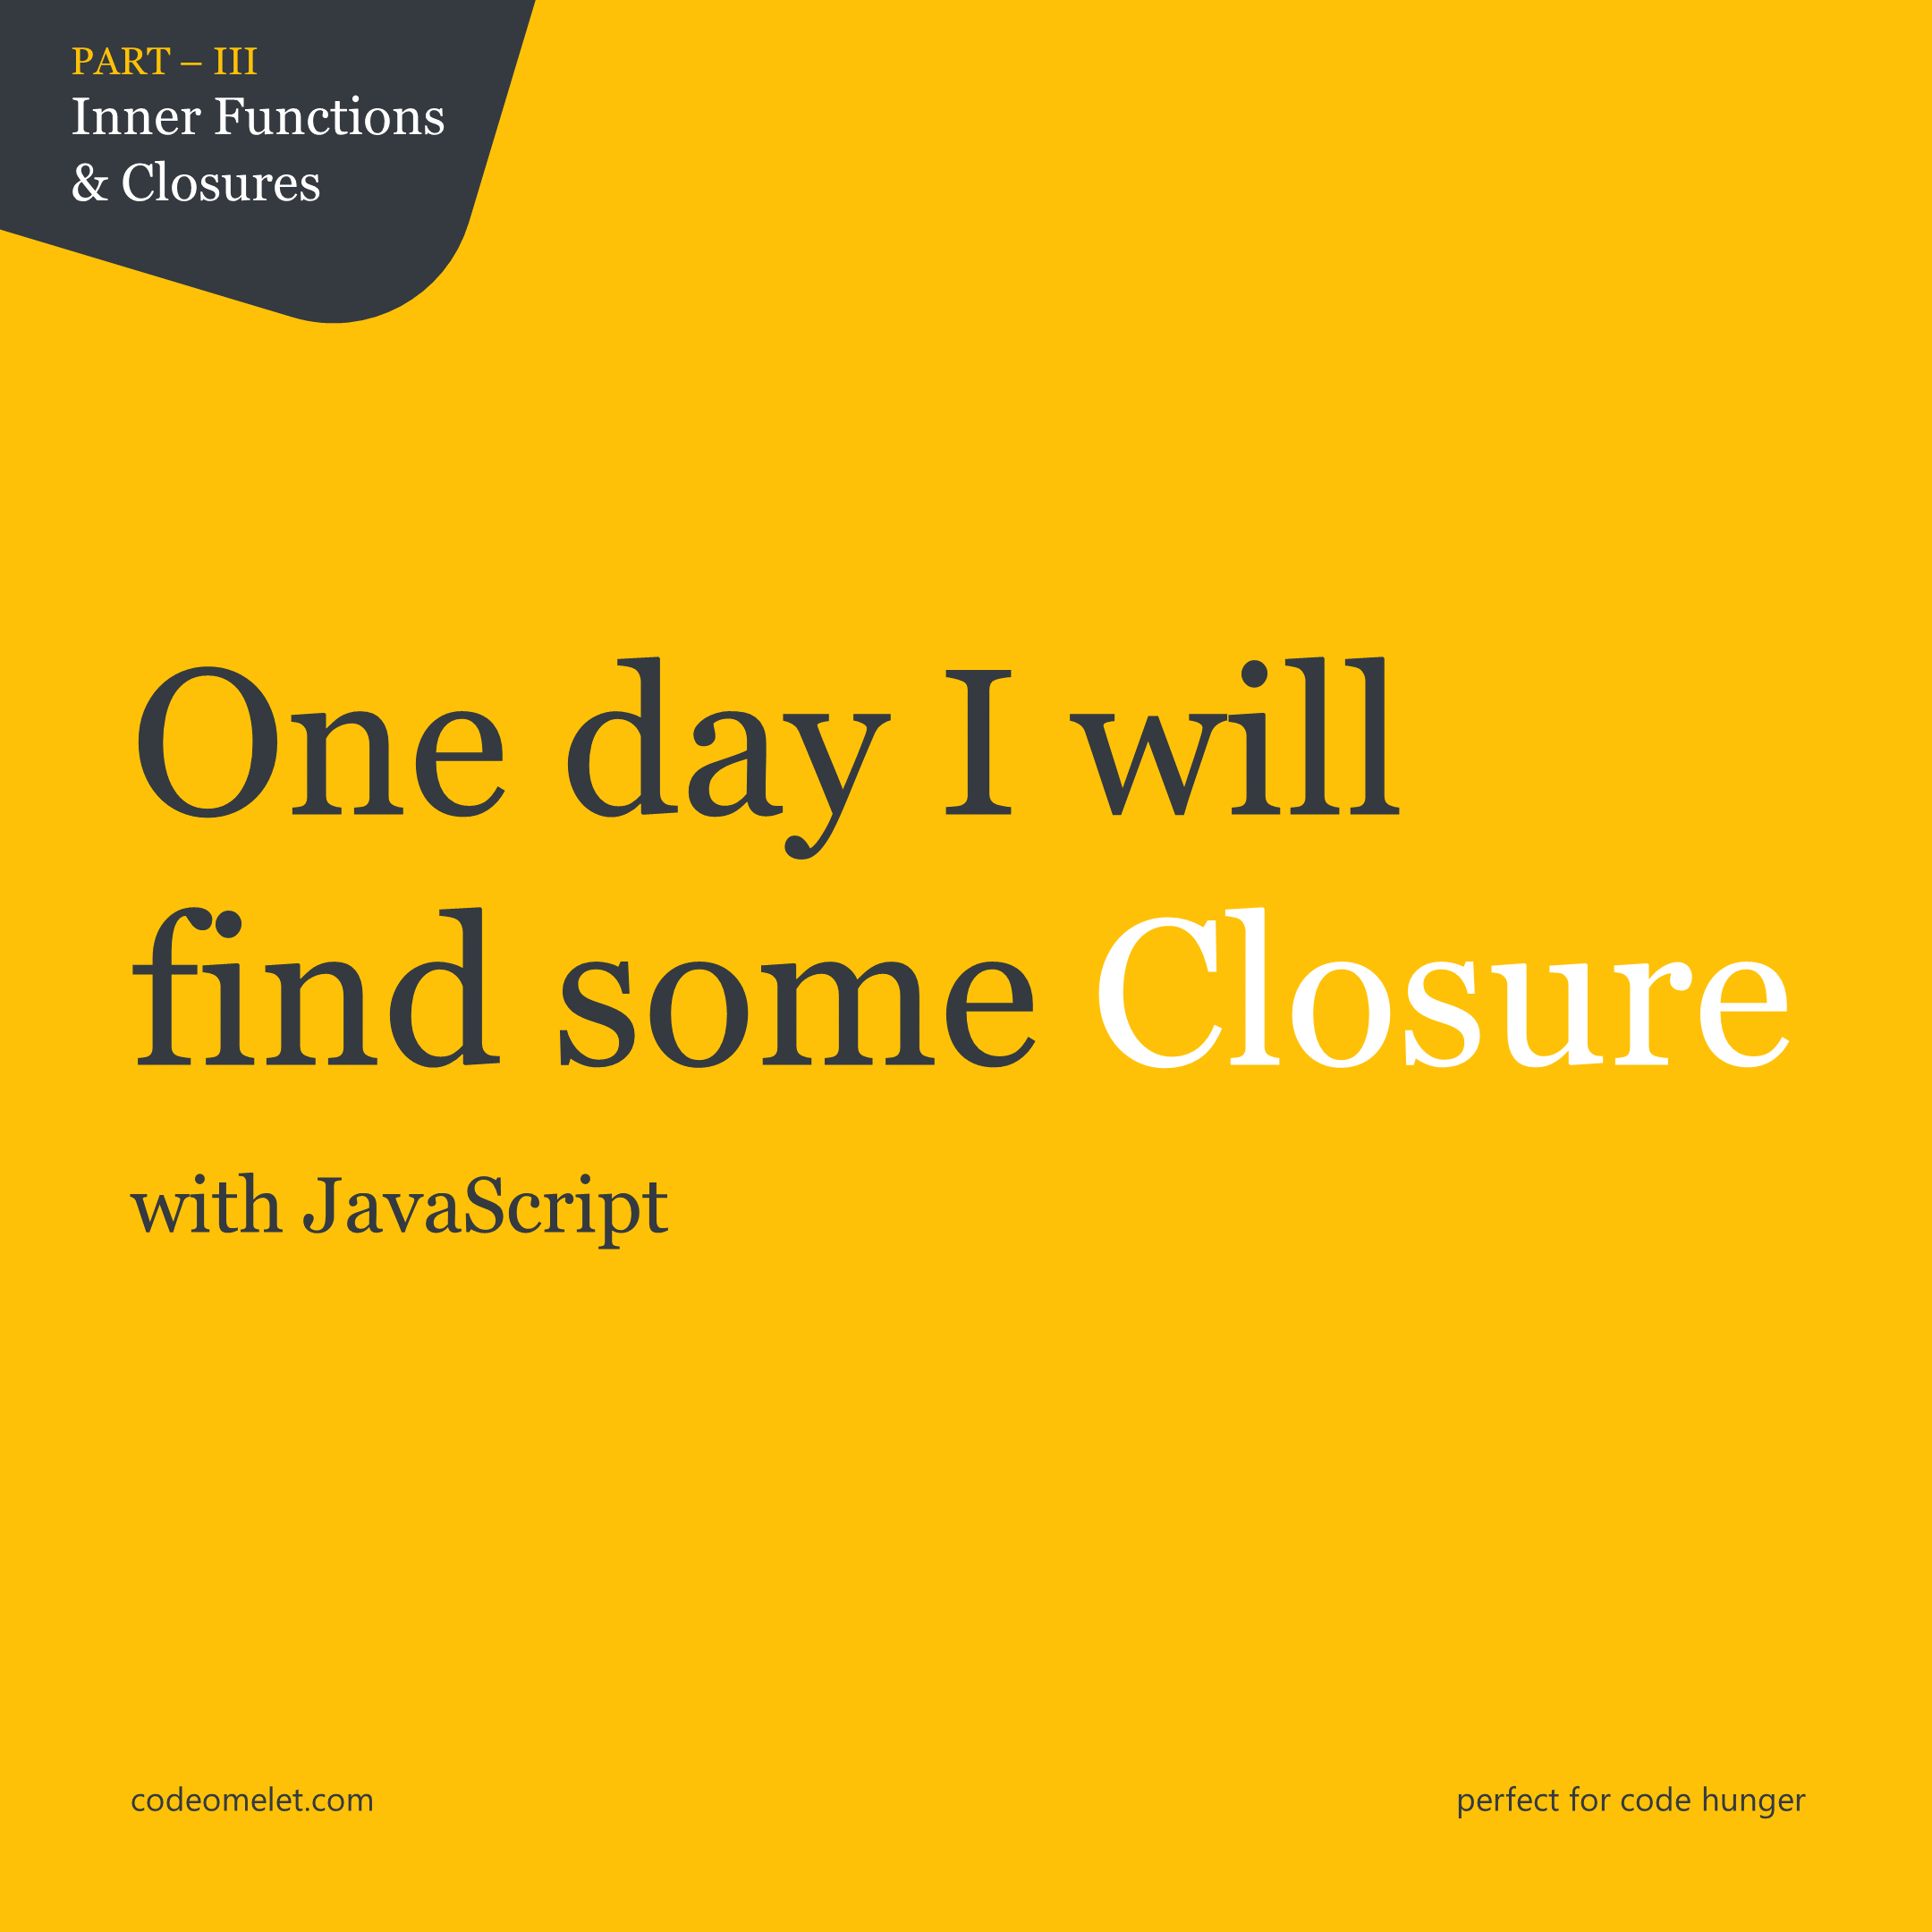 One day I will find some Closure - Inner Functions & Closures